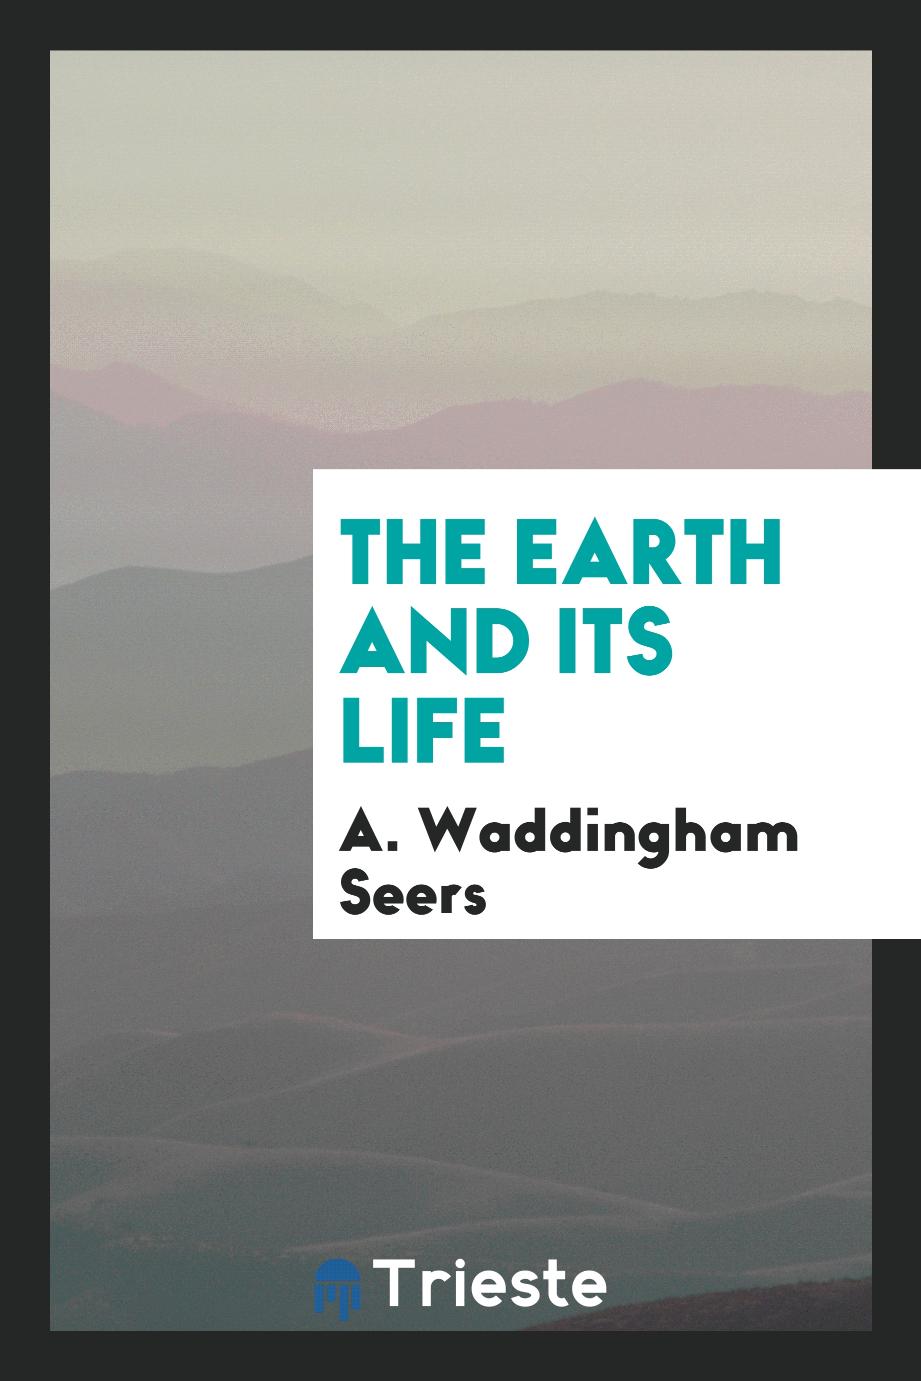 A. Waddingham Seers - The Earth and Its Life